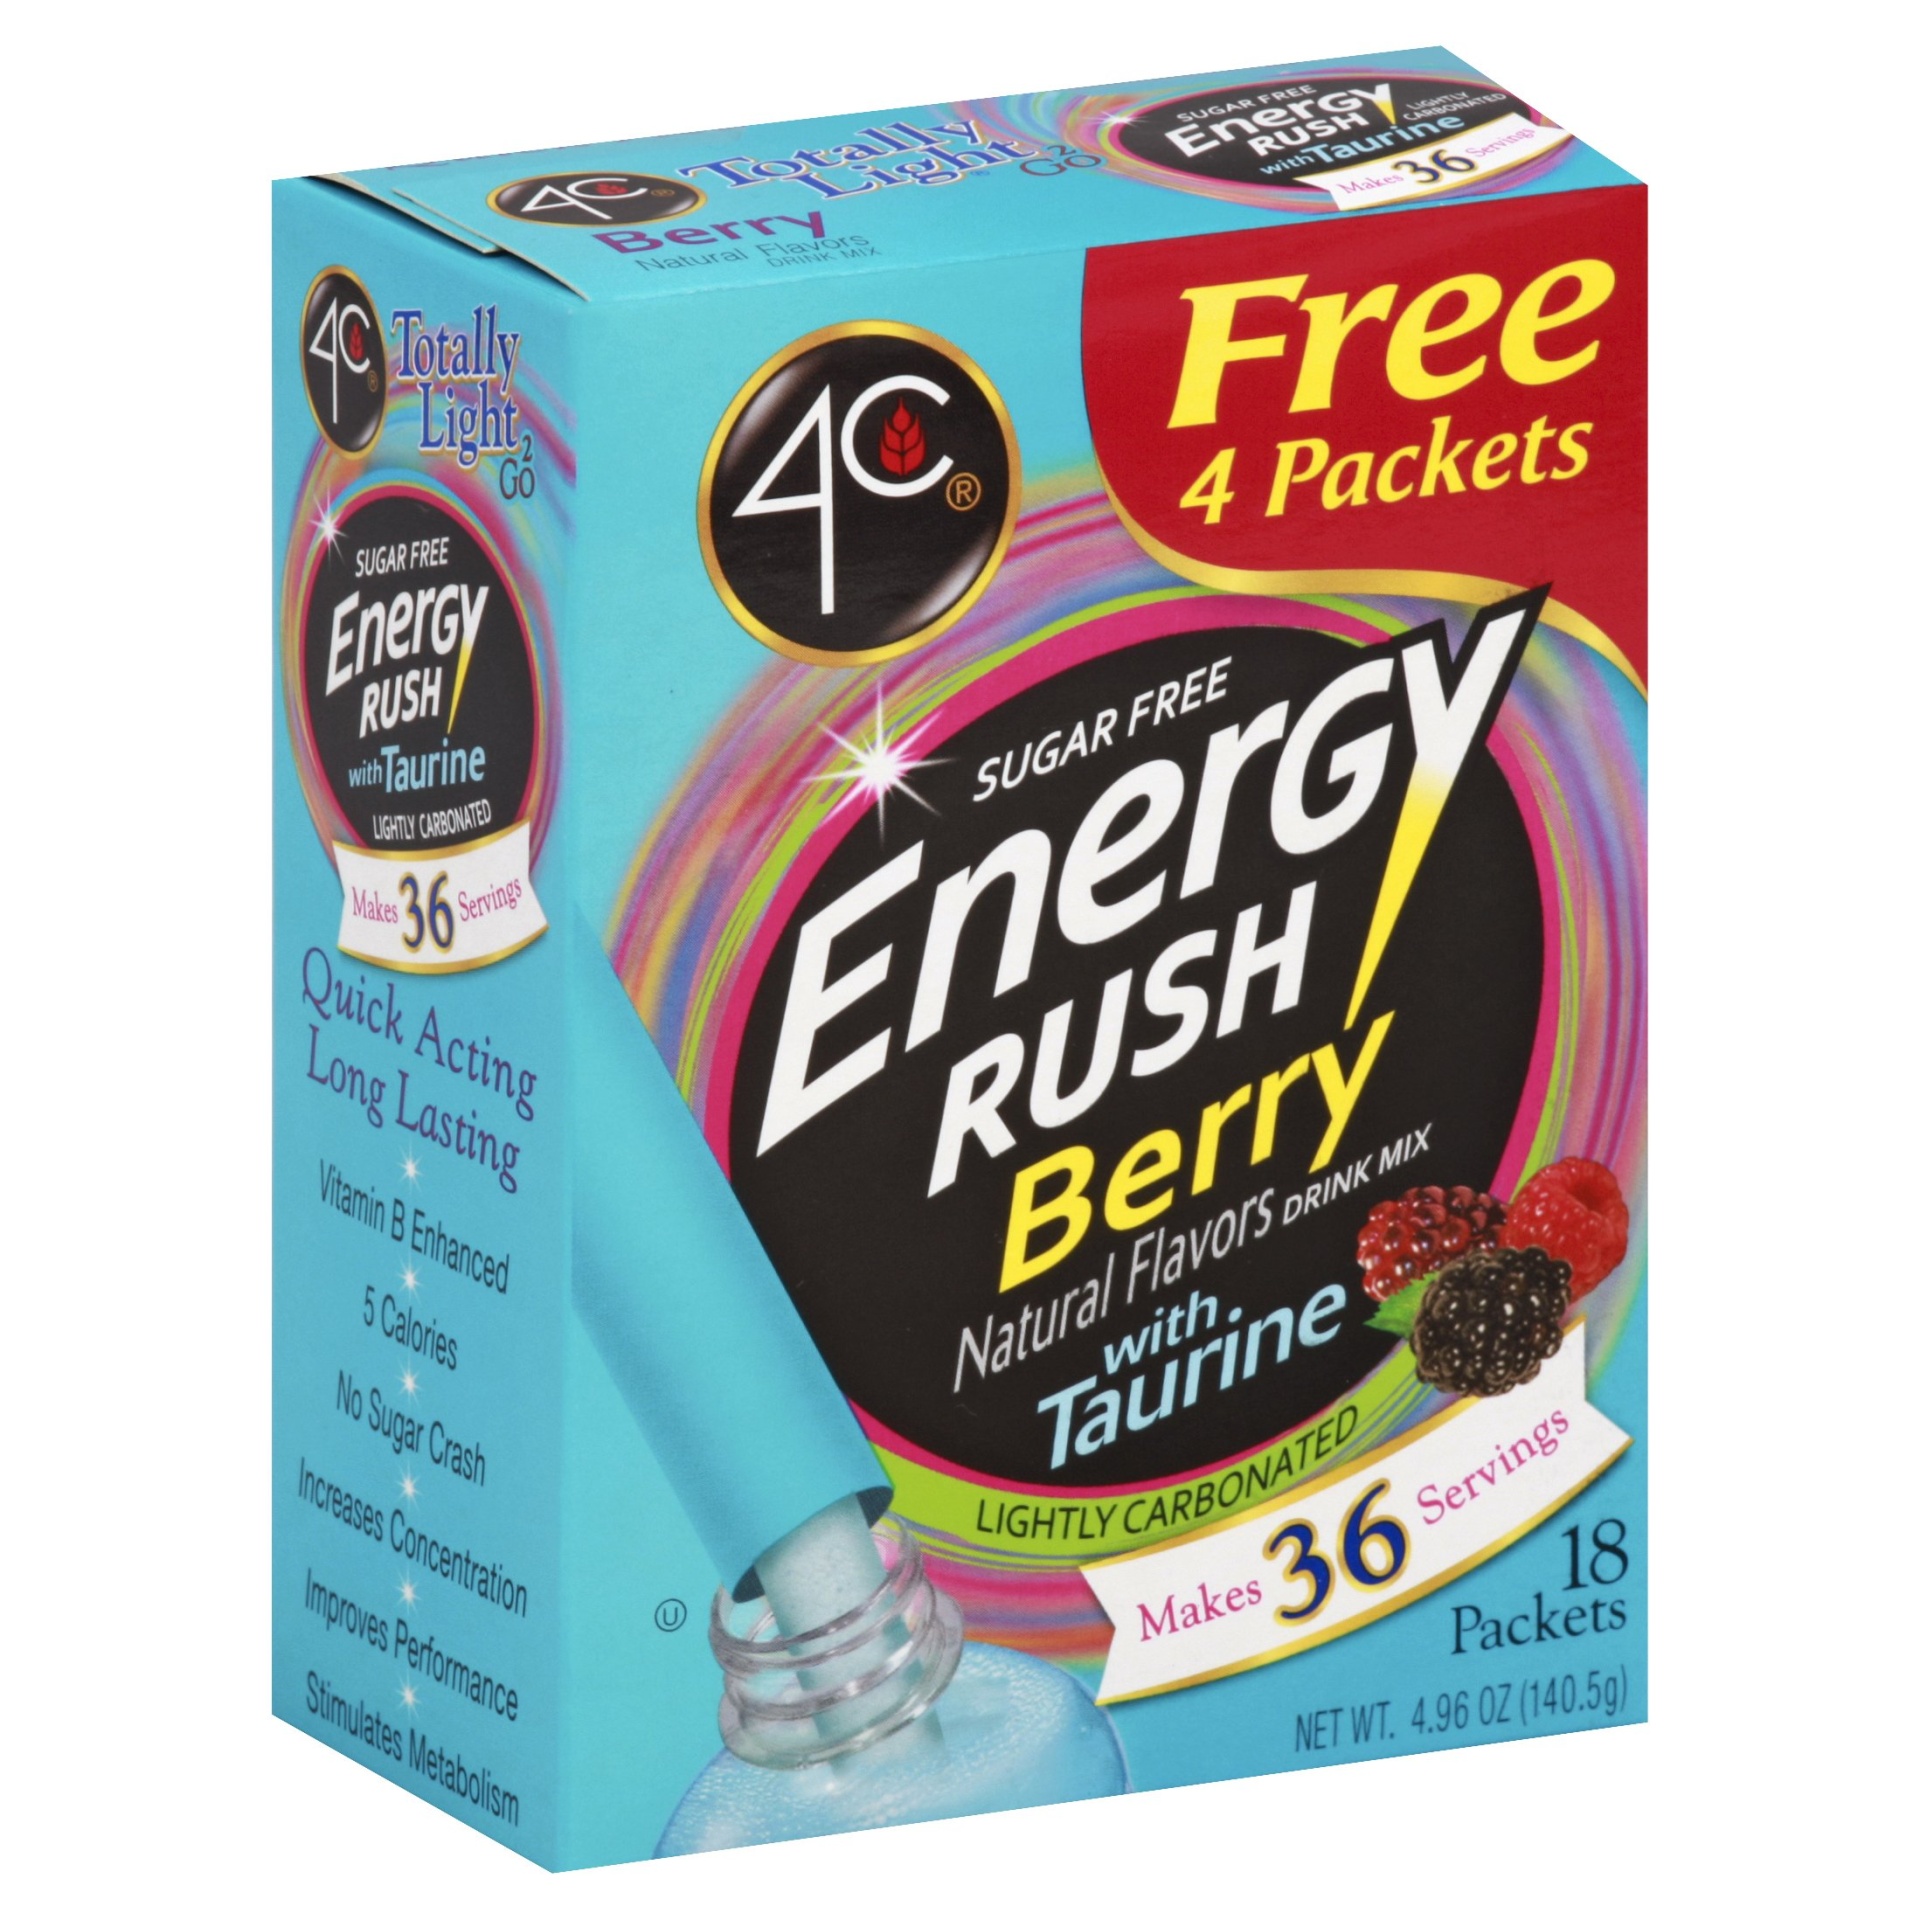 slide 1 of 8, 4C Totally Light 2 Go Berry Energy Rush with Taurine, 18 ct